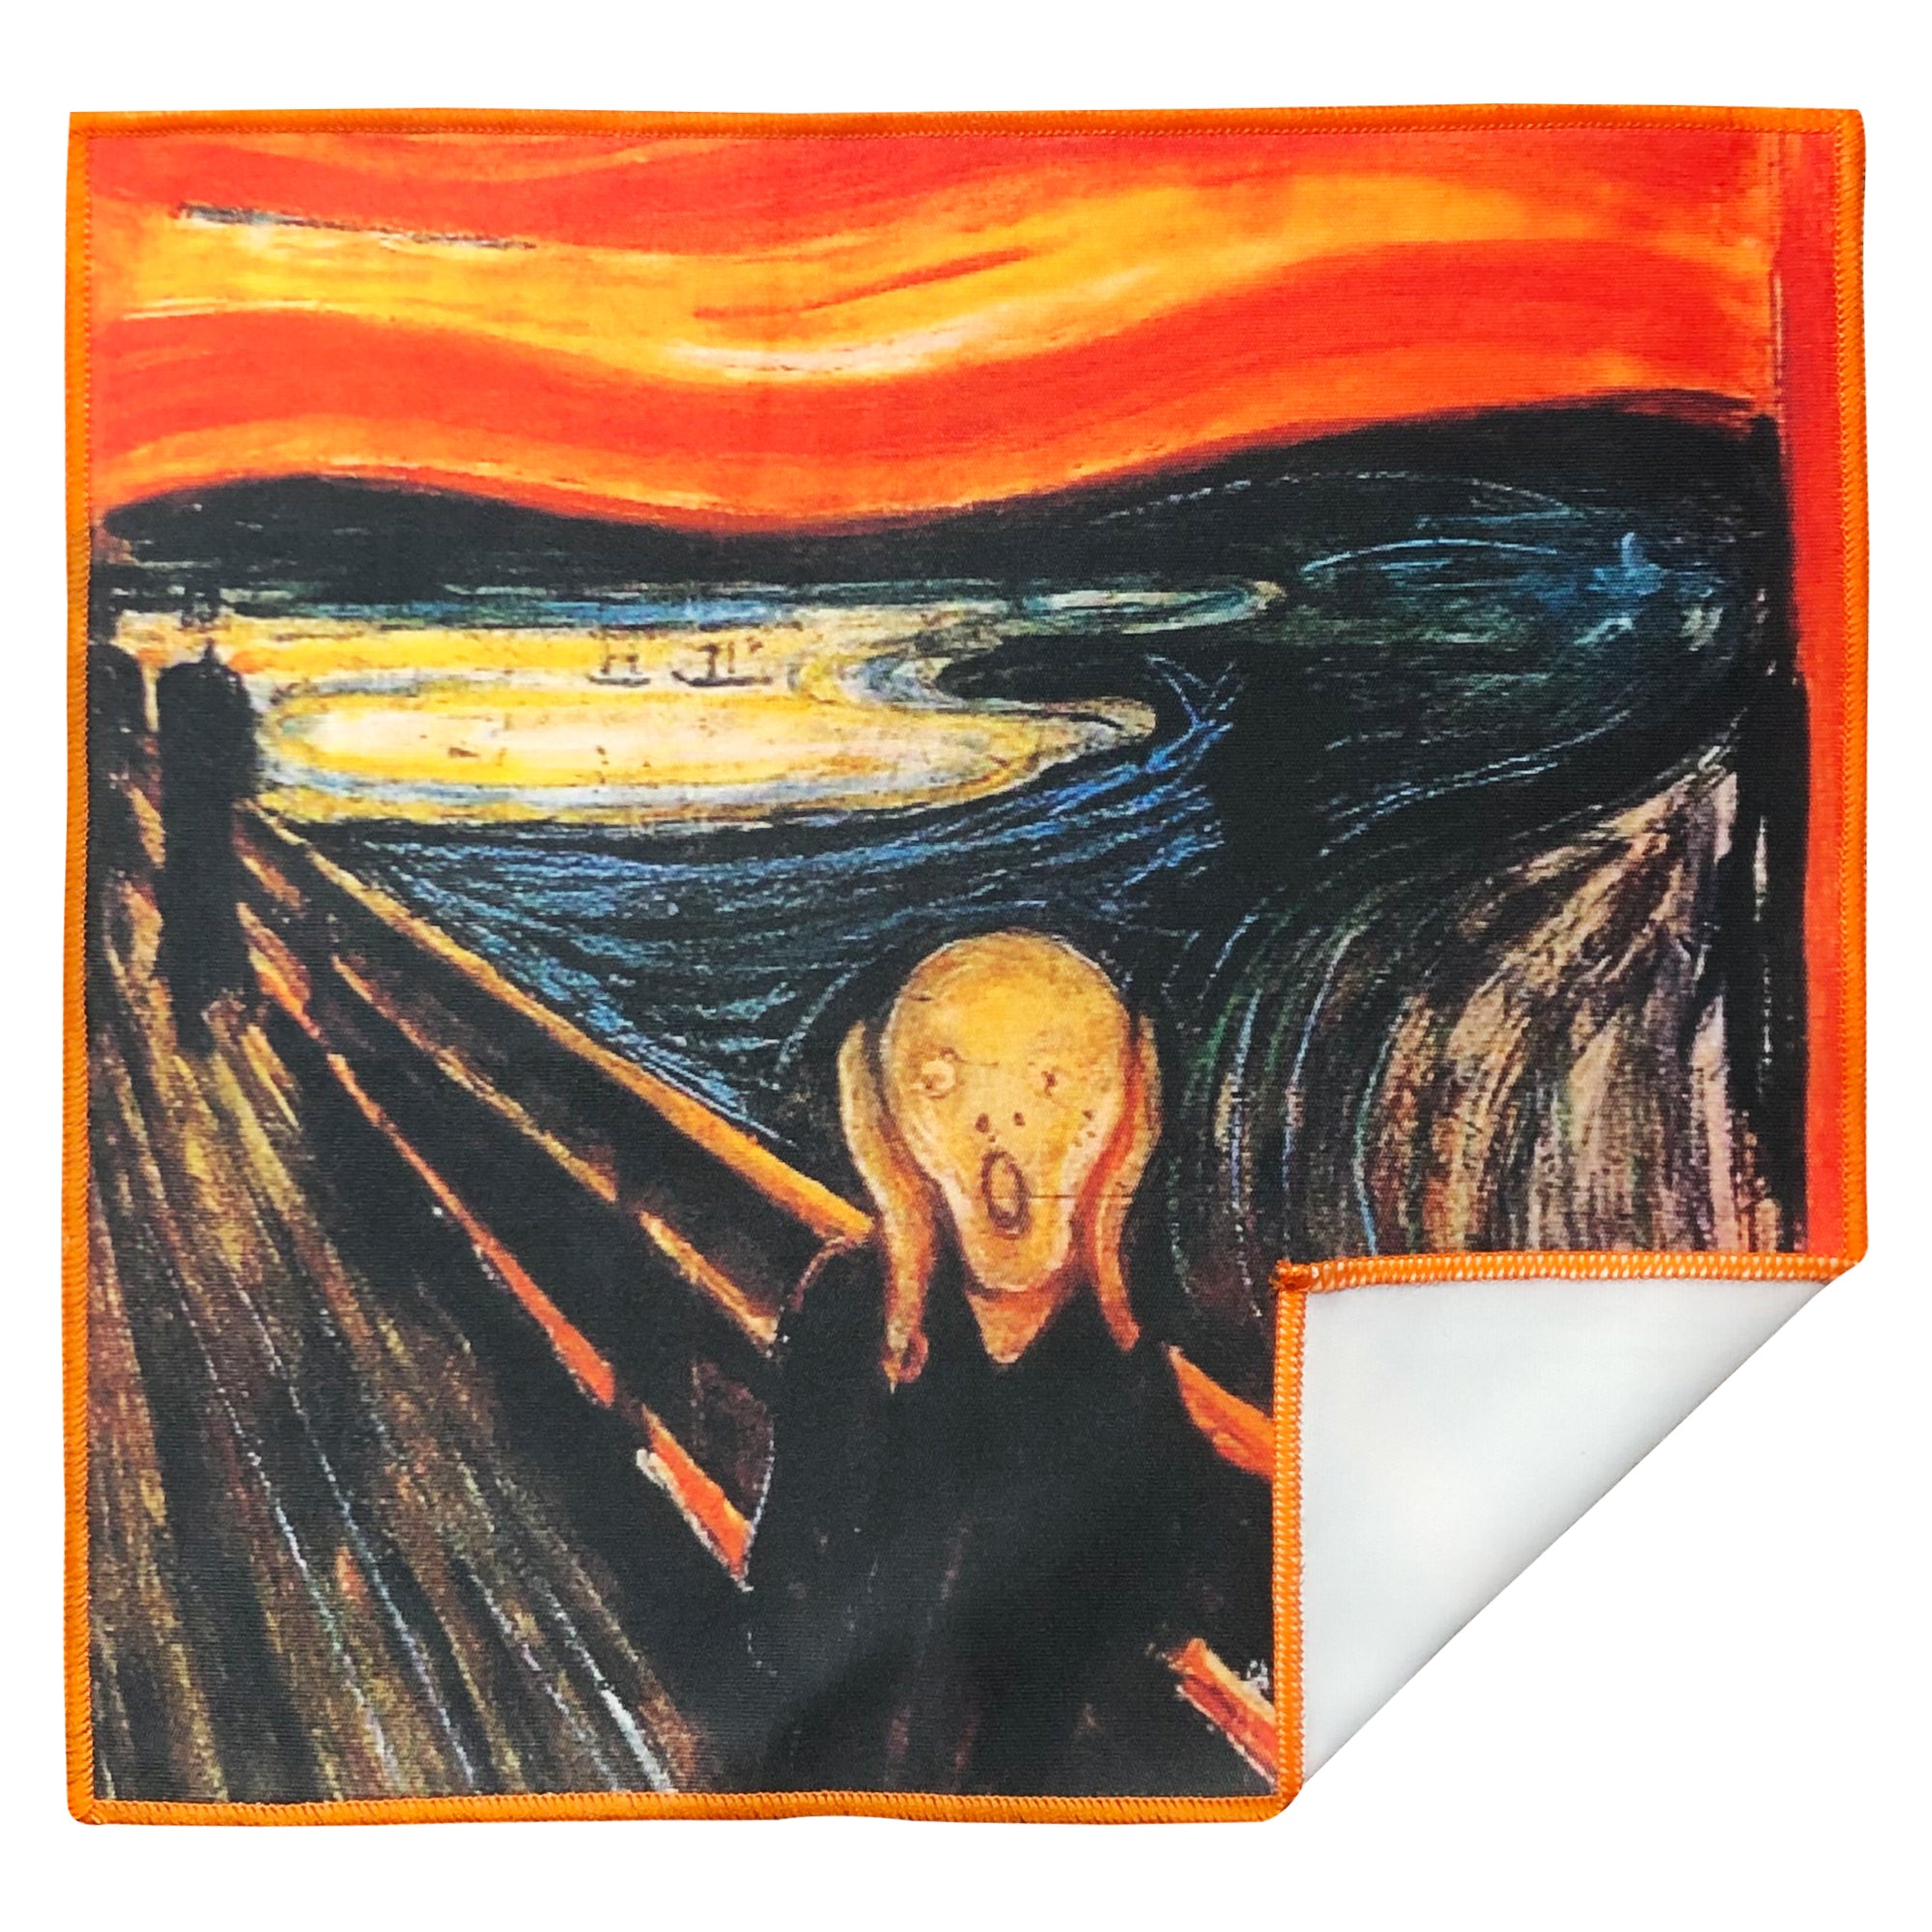 [6 Pack] Edvard Munch "The Scream" - Art Collection - Ultra Premium Quality Microfiber Cleaning Cloths